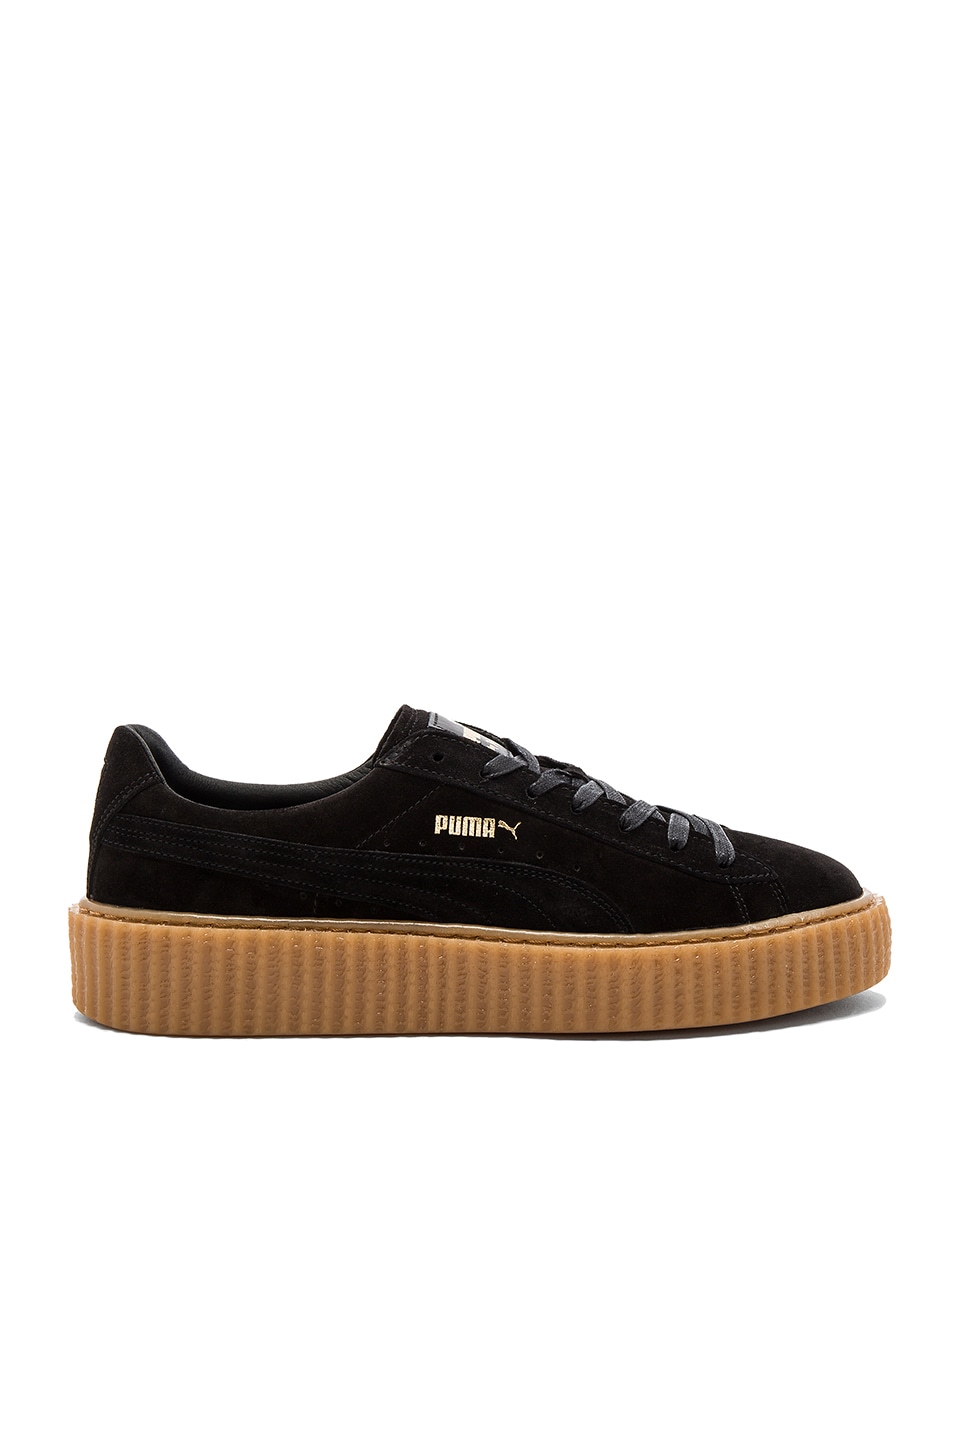 puma creepers afterpay